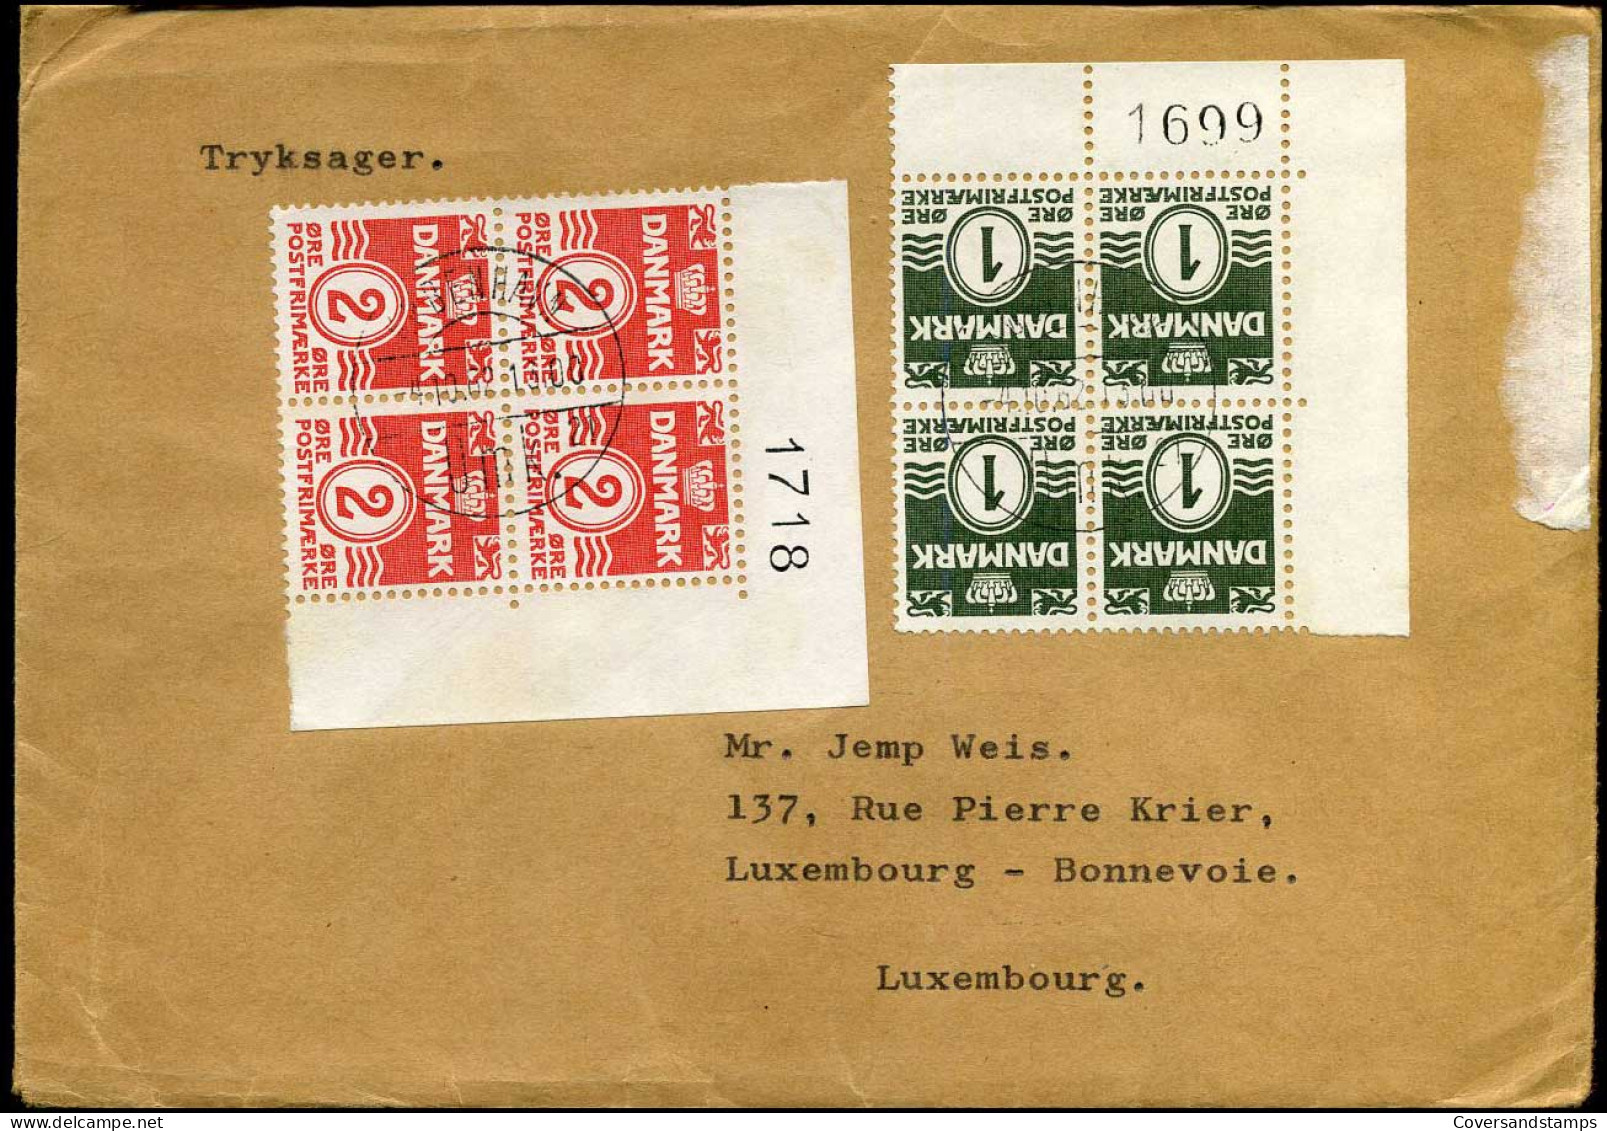 Cover To Luxemburg - Storia Postale